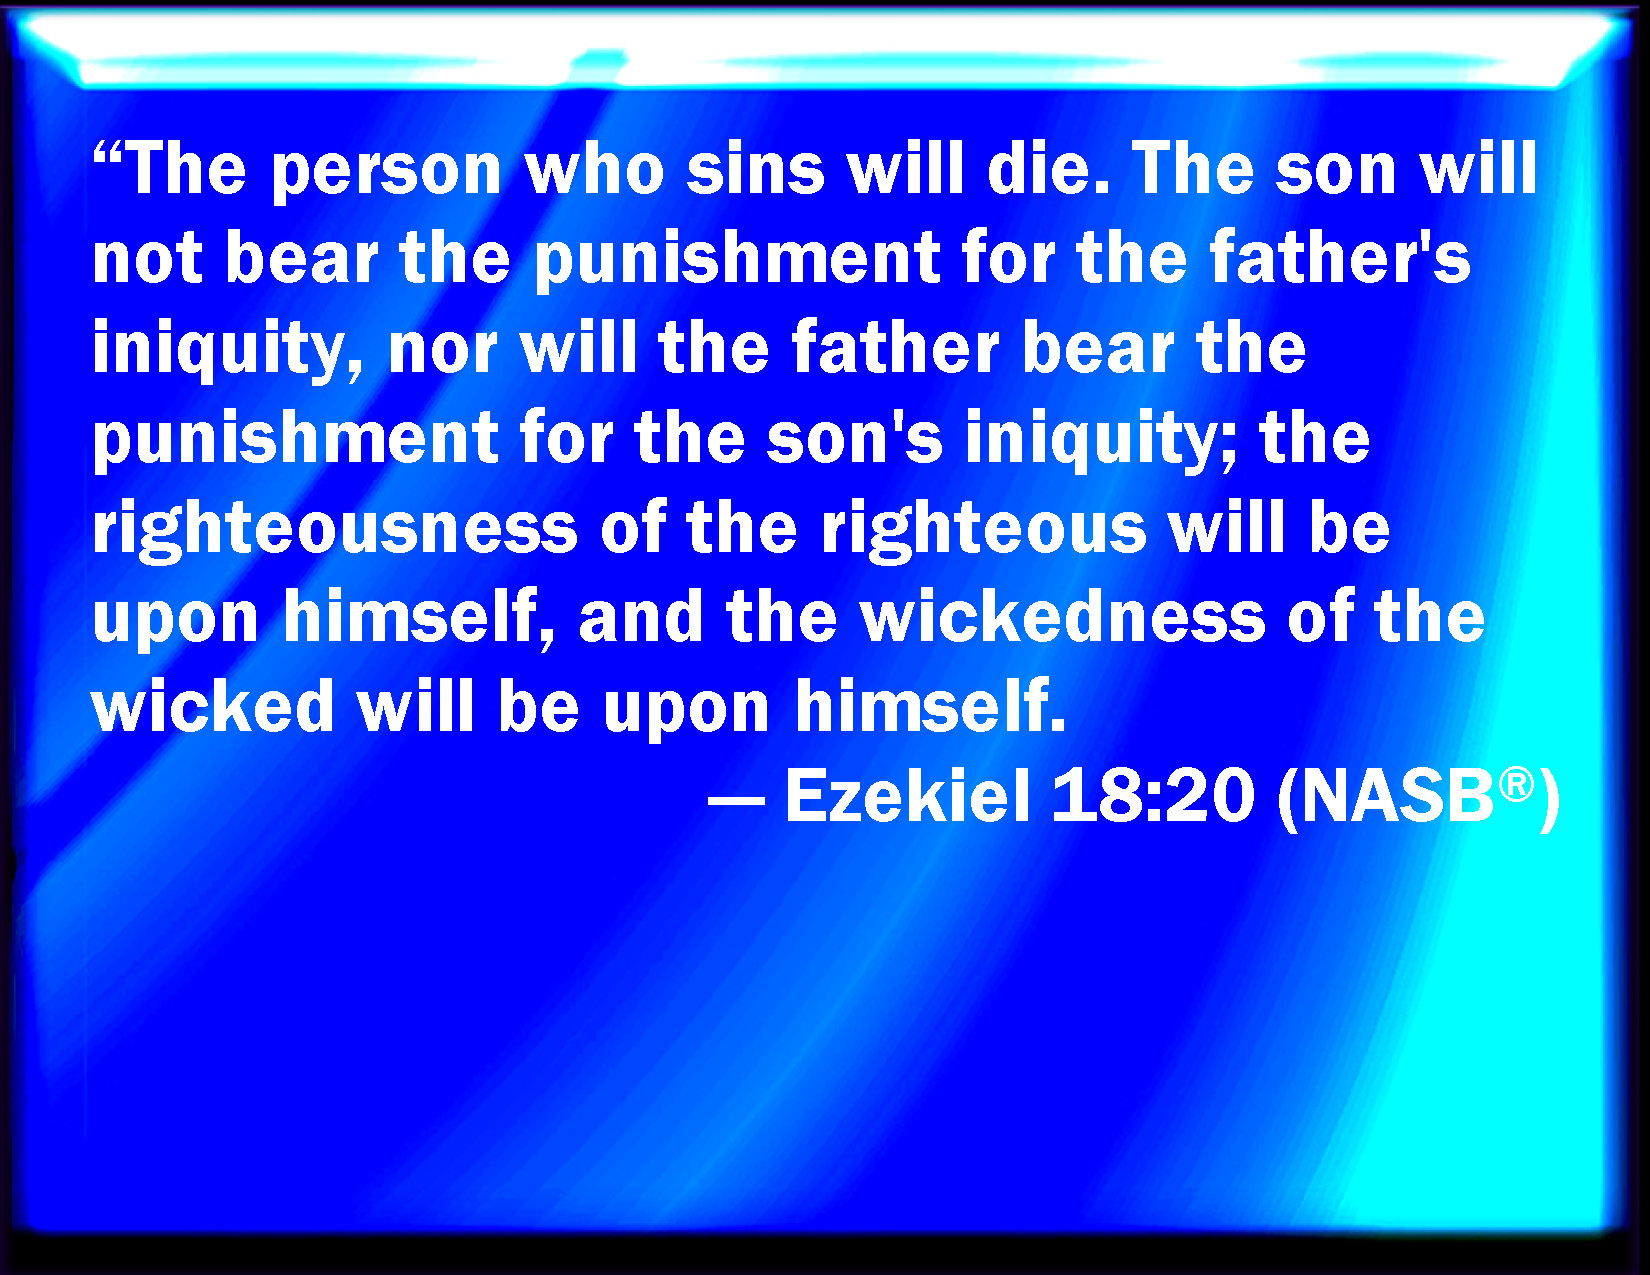 the sins of the father are not the sins of the son